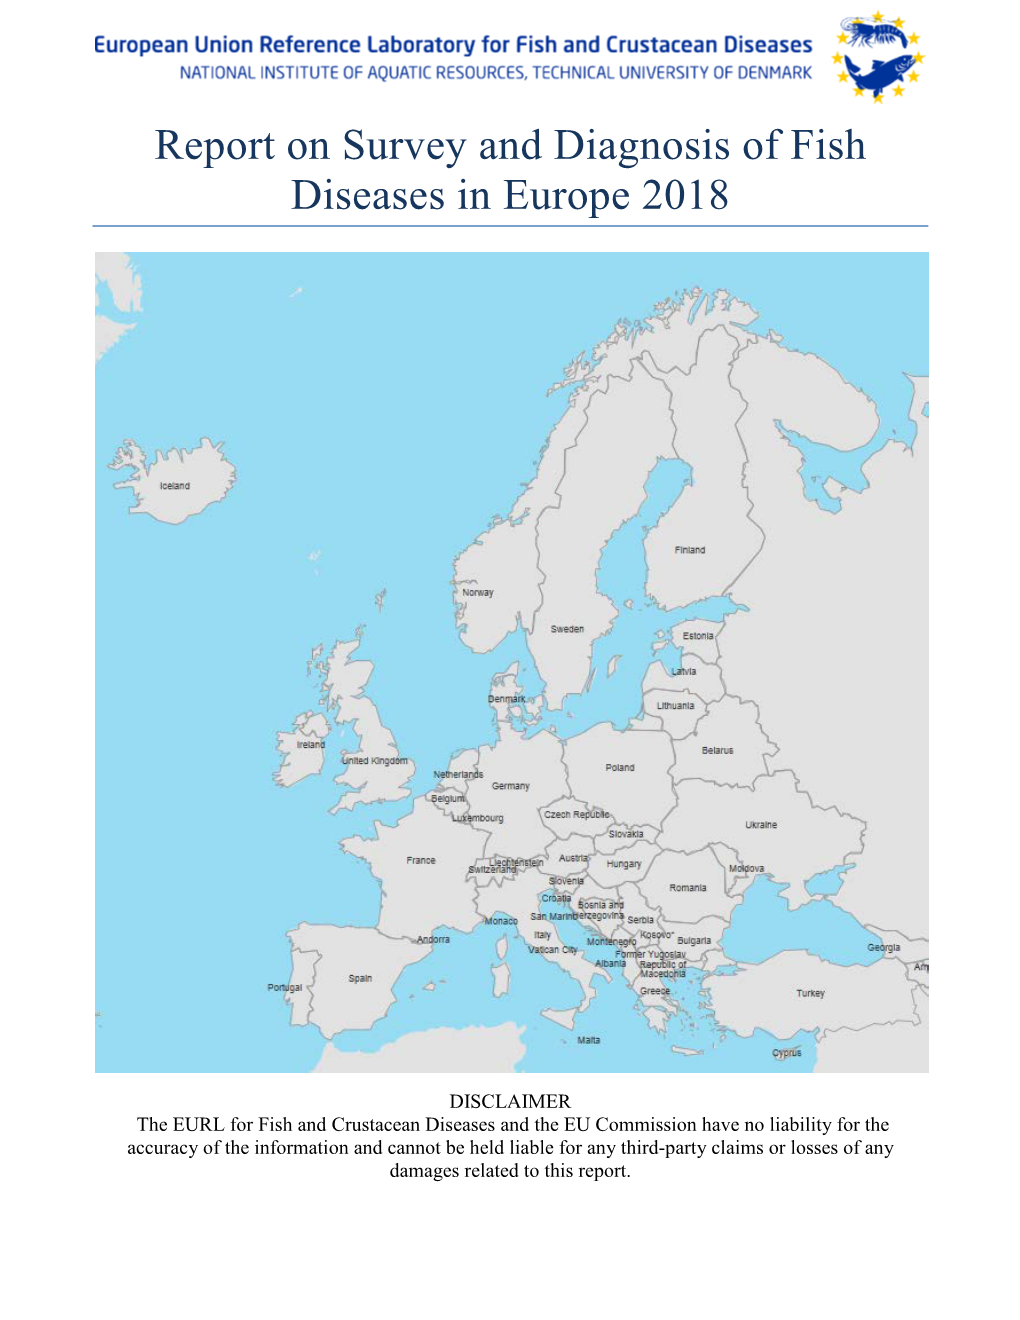 Report on Survey and Diagnosis of Fish Diseases in Europe 2018